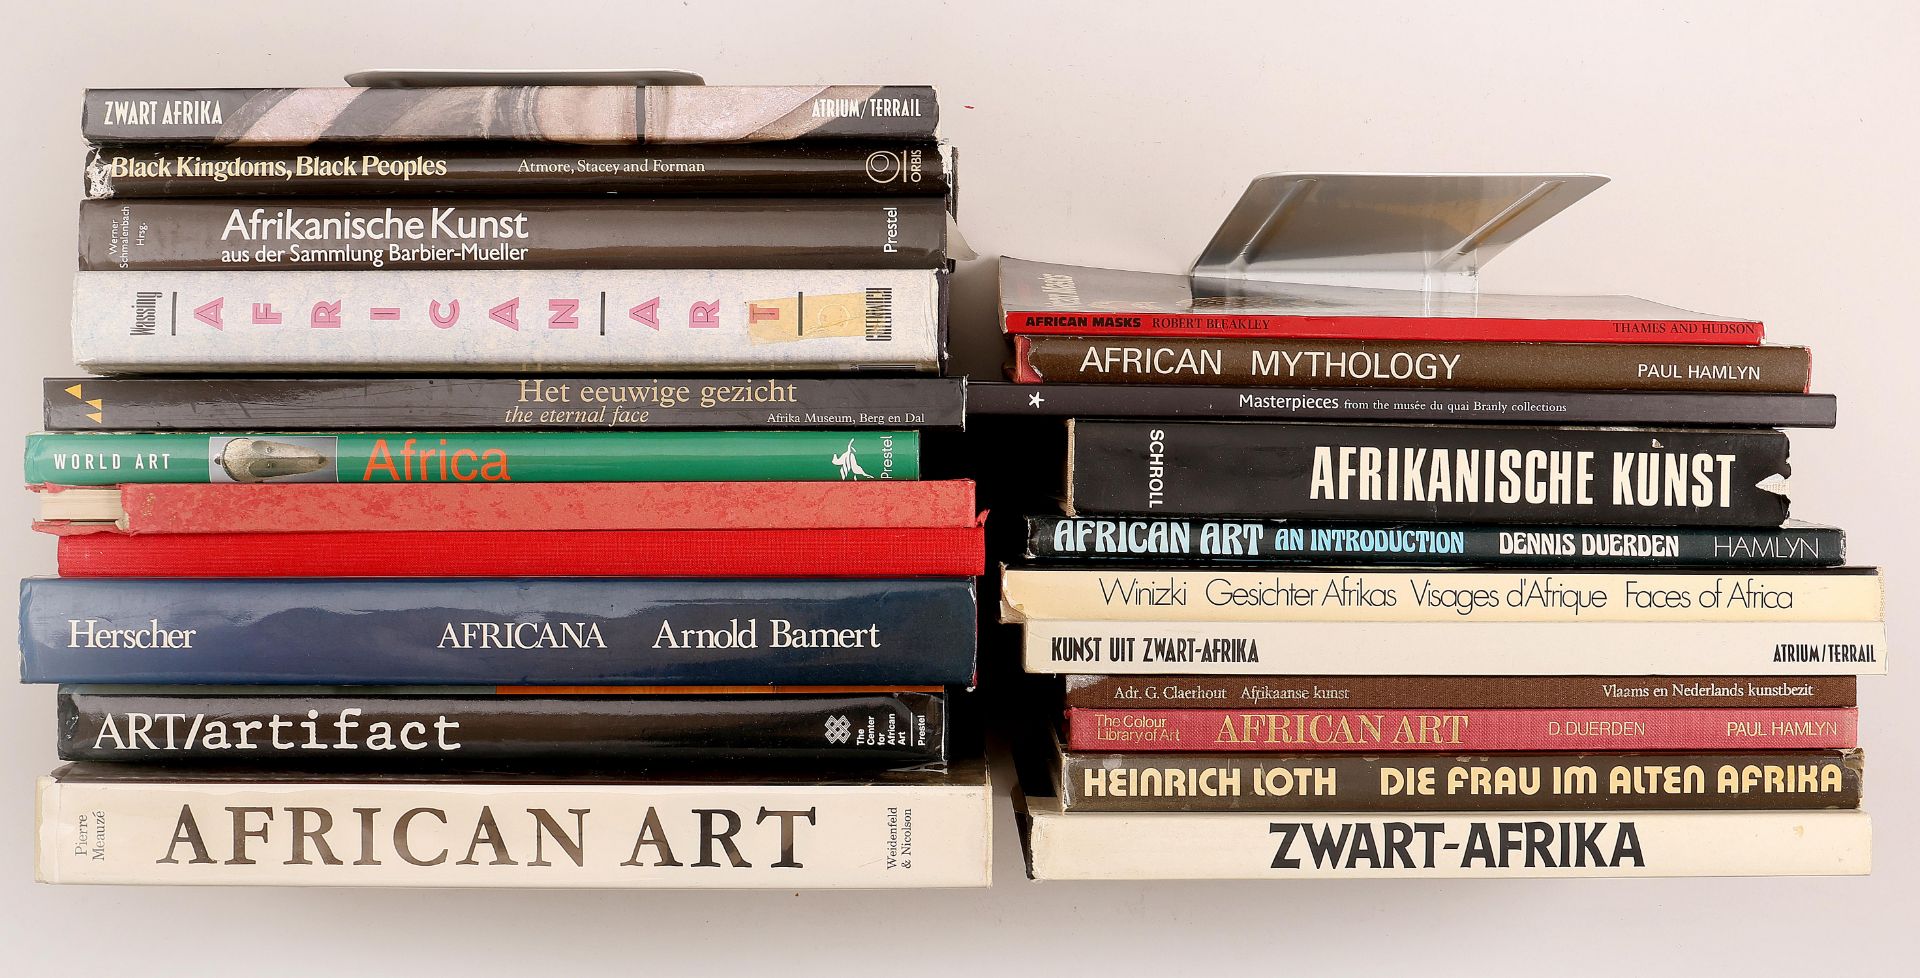 Box with various publications on African culture, arts and religions. English, German and Dutch